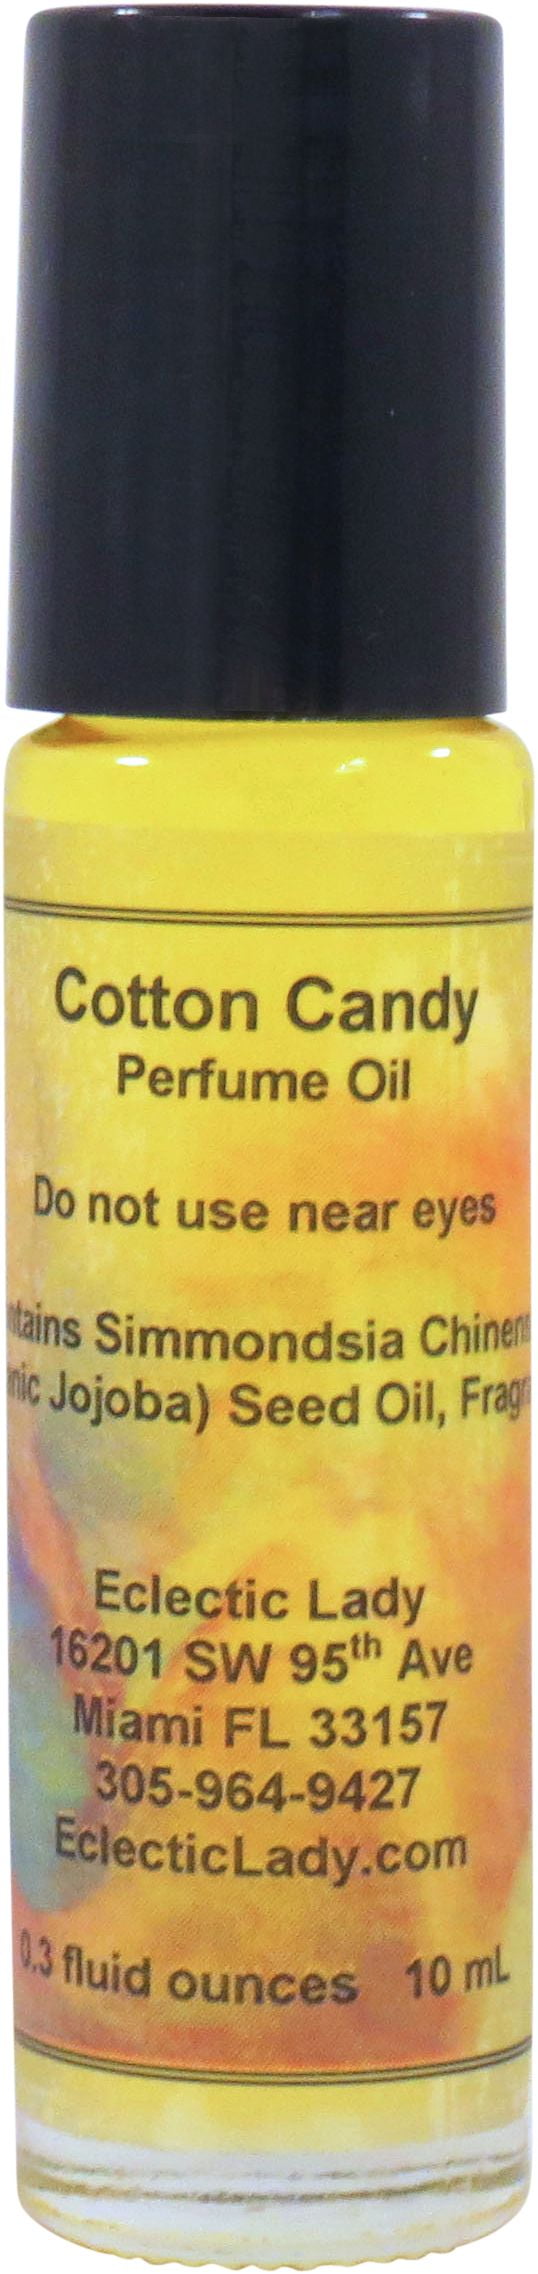 Cotton Candy Perfume Oil, Small, Size: 0.3 oz